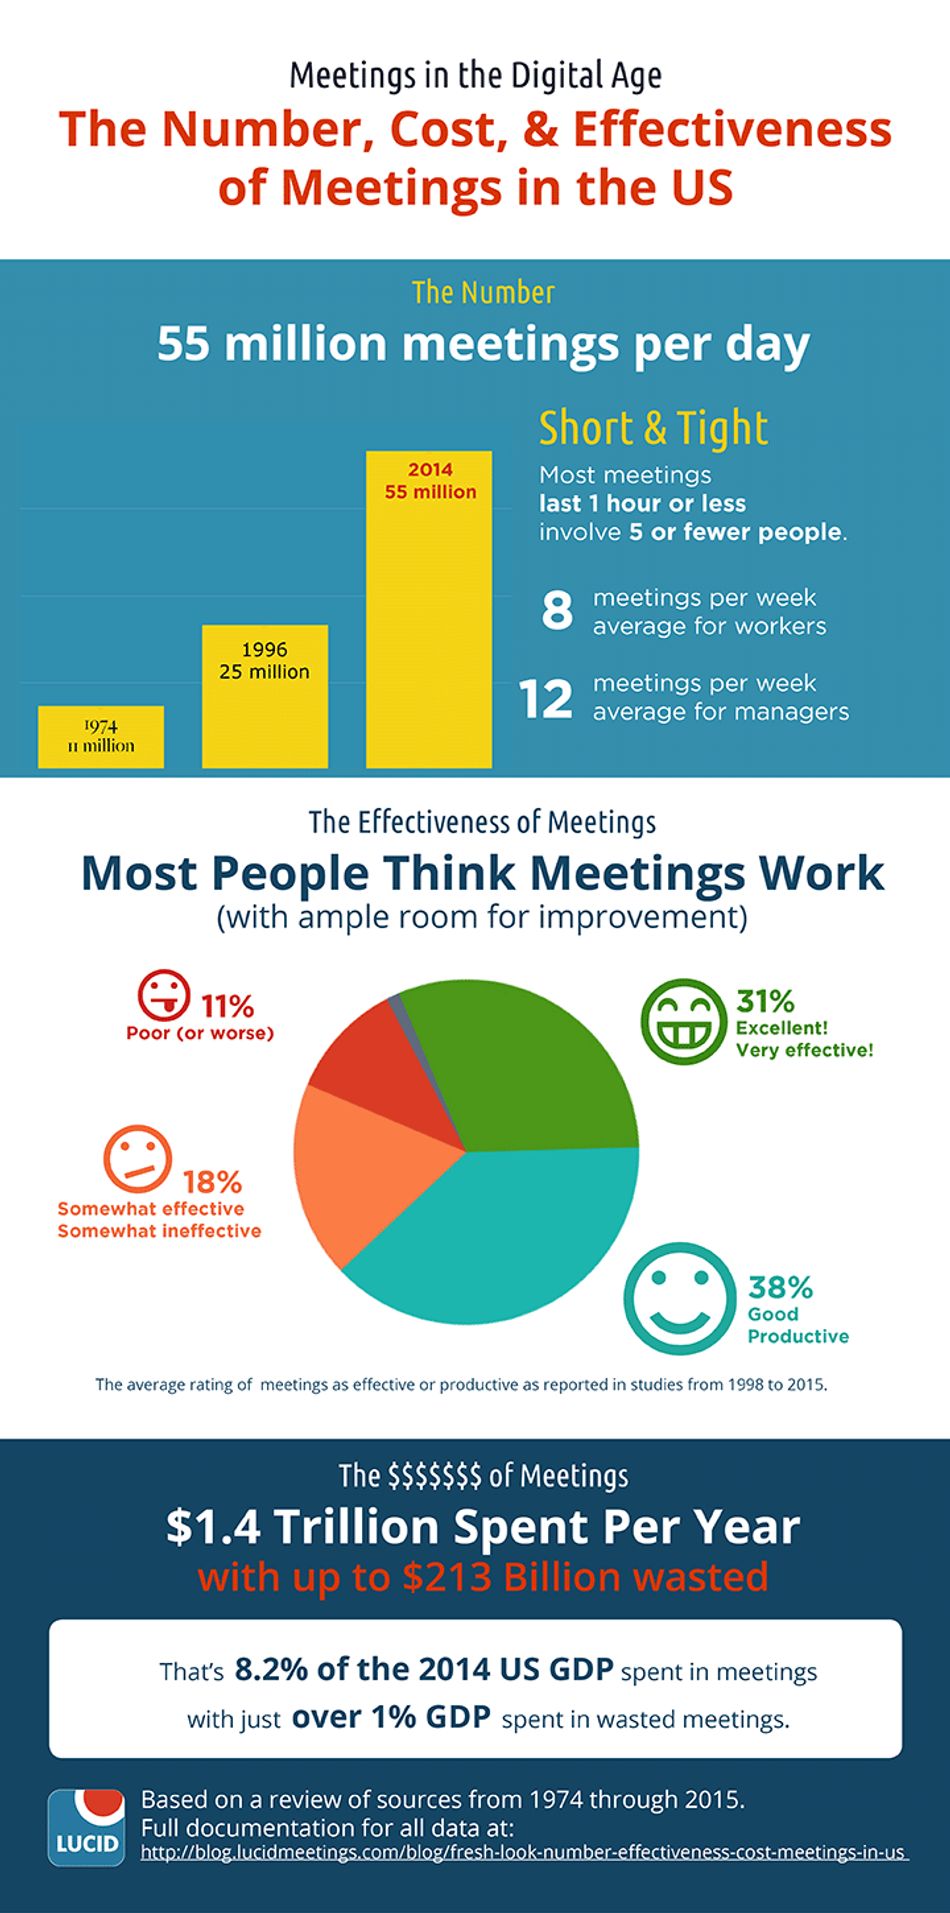 The number, cost, and effectiveness of meetings in the US